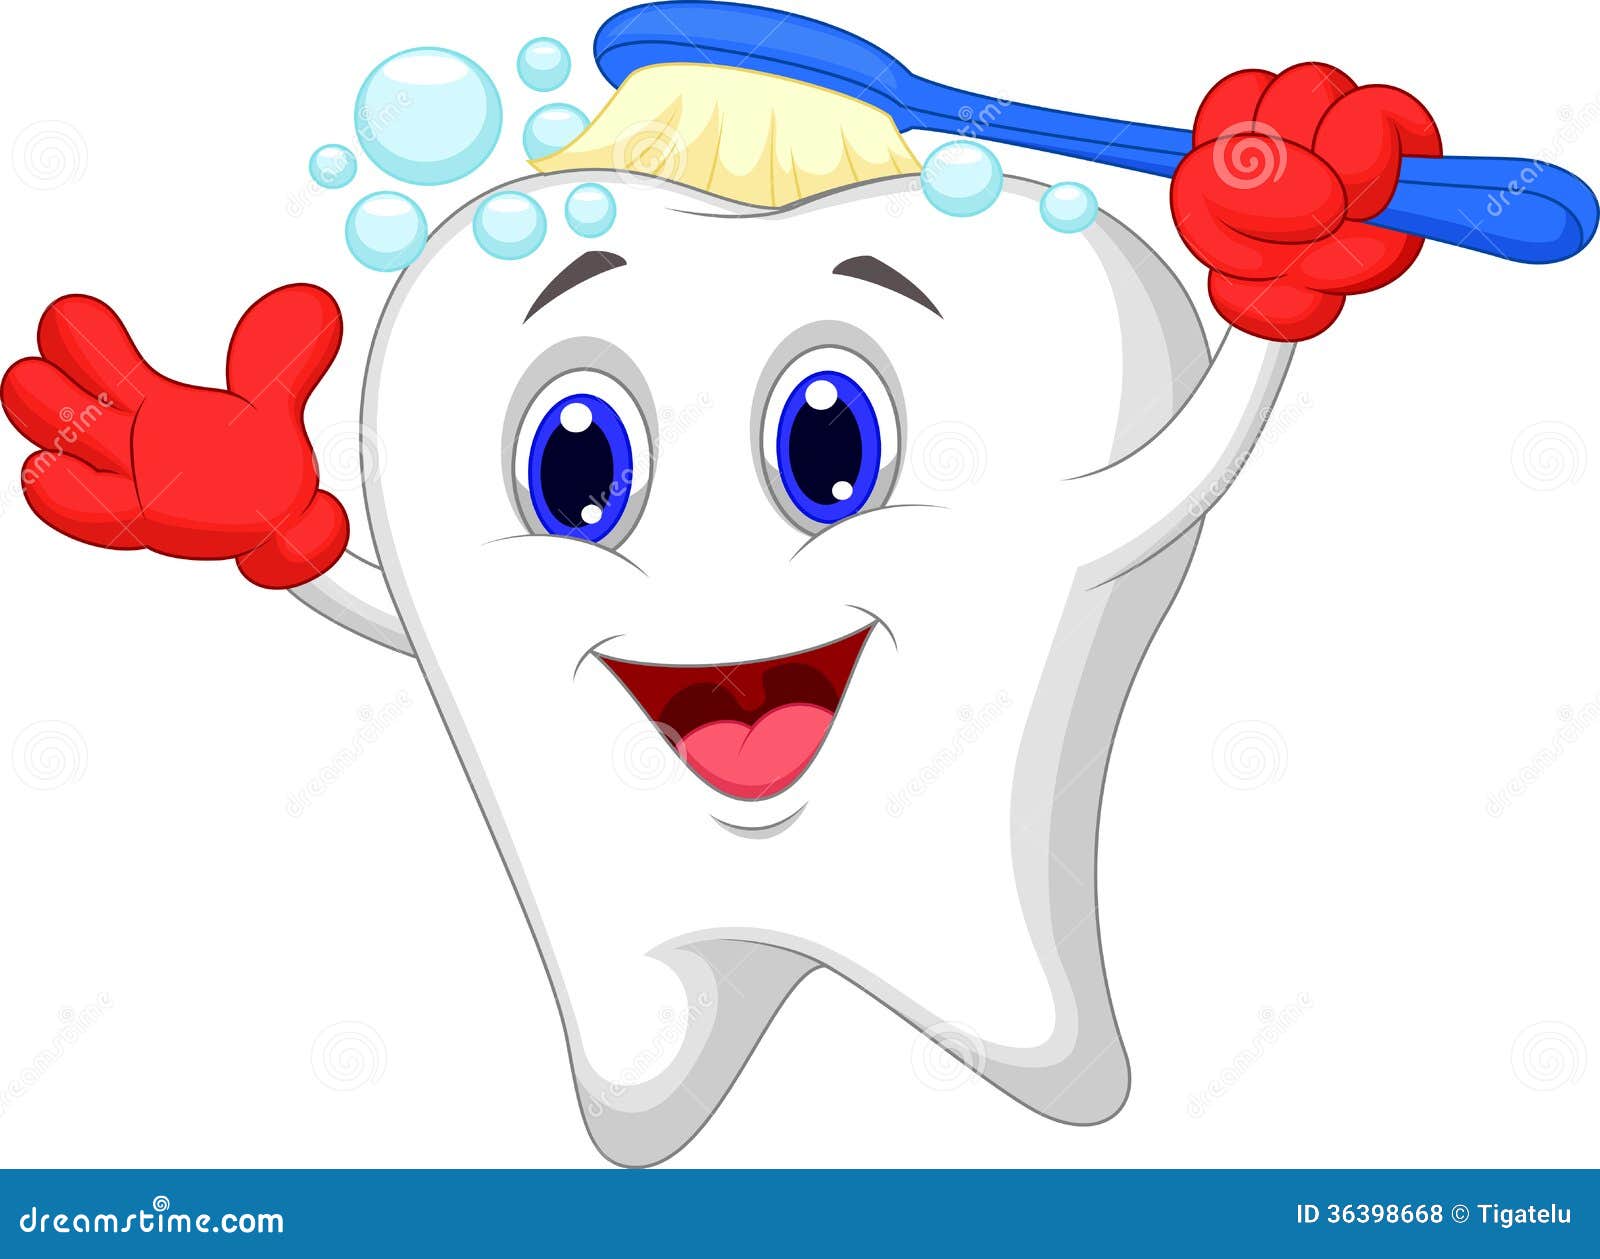 happy tooth clipart - photo #26